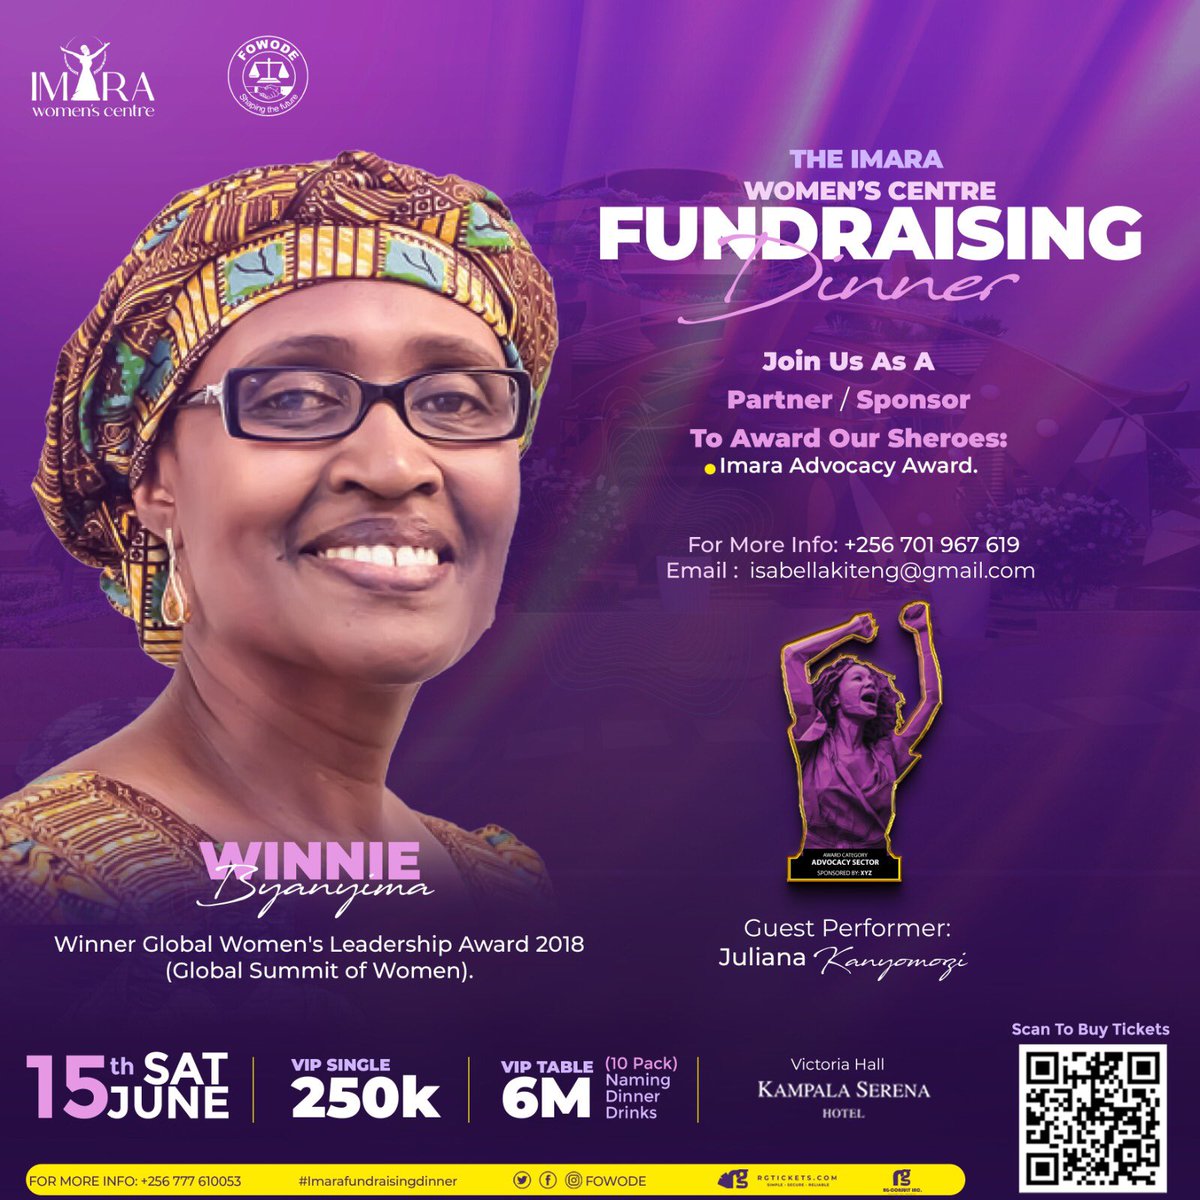 Did you know? Winnie Byanyima was honoured with the 2018 Global Women's Leadership Award by the Global Summit of Women. At the Imara Fundraising Dinner, we will celebrate such Sheroes like her! Corporate organizations, to sponsor any of these awards kindly contact us at…